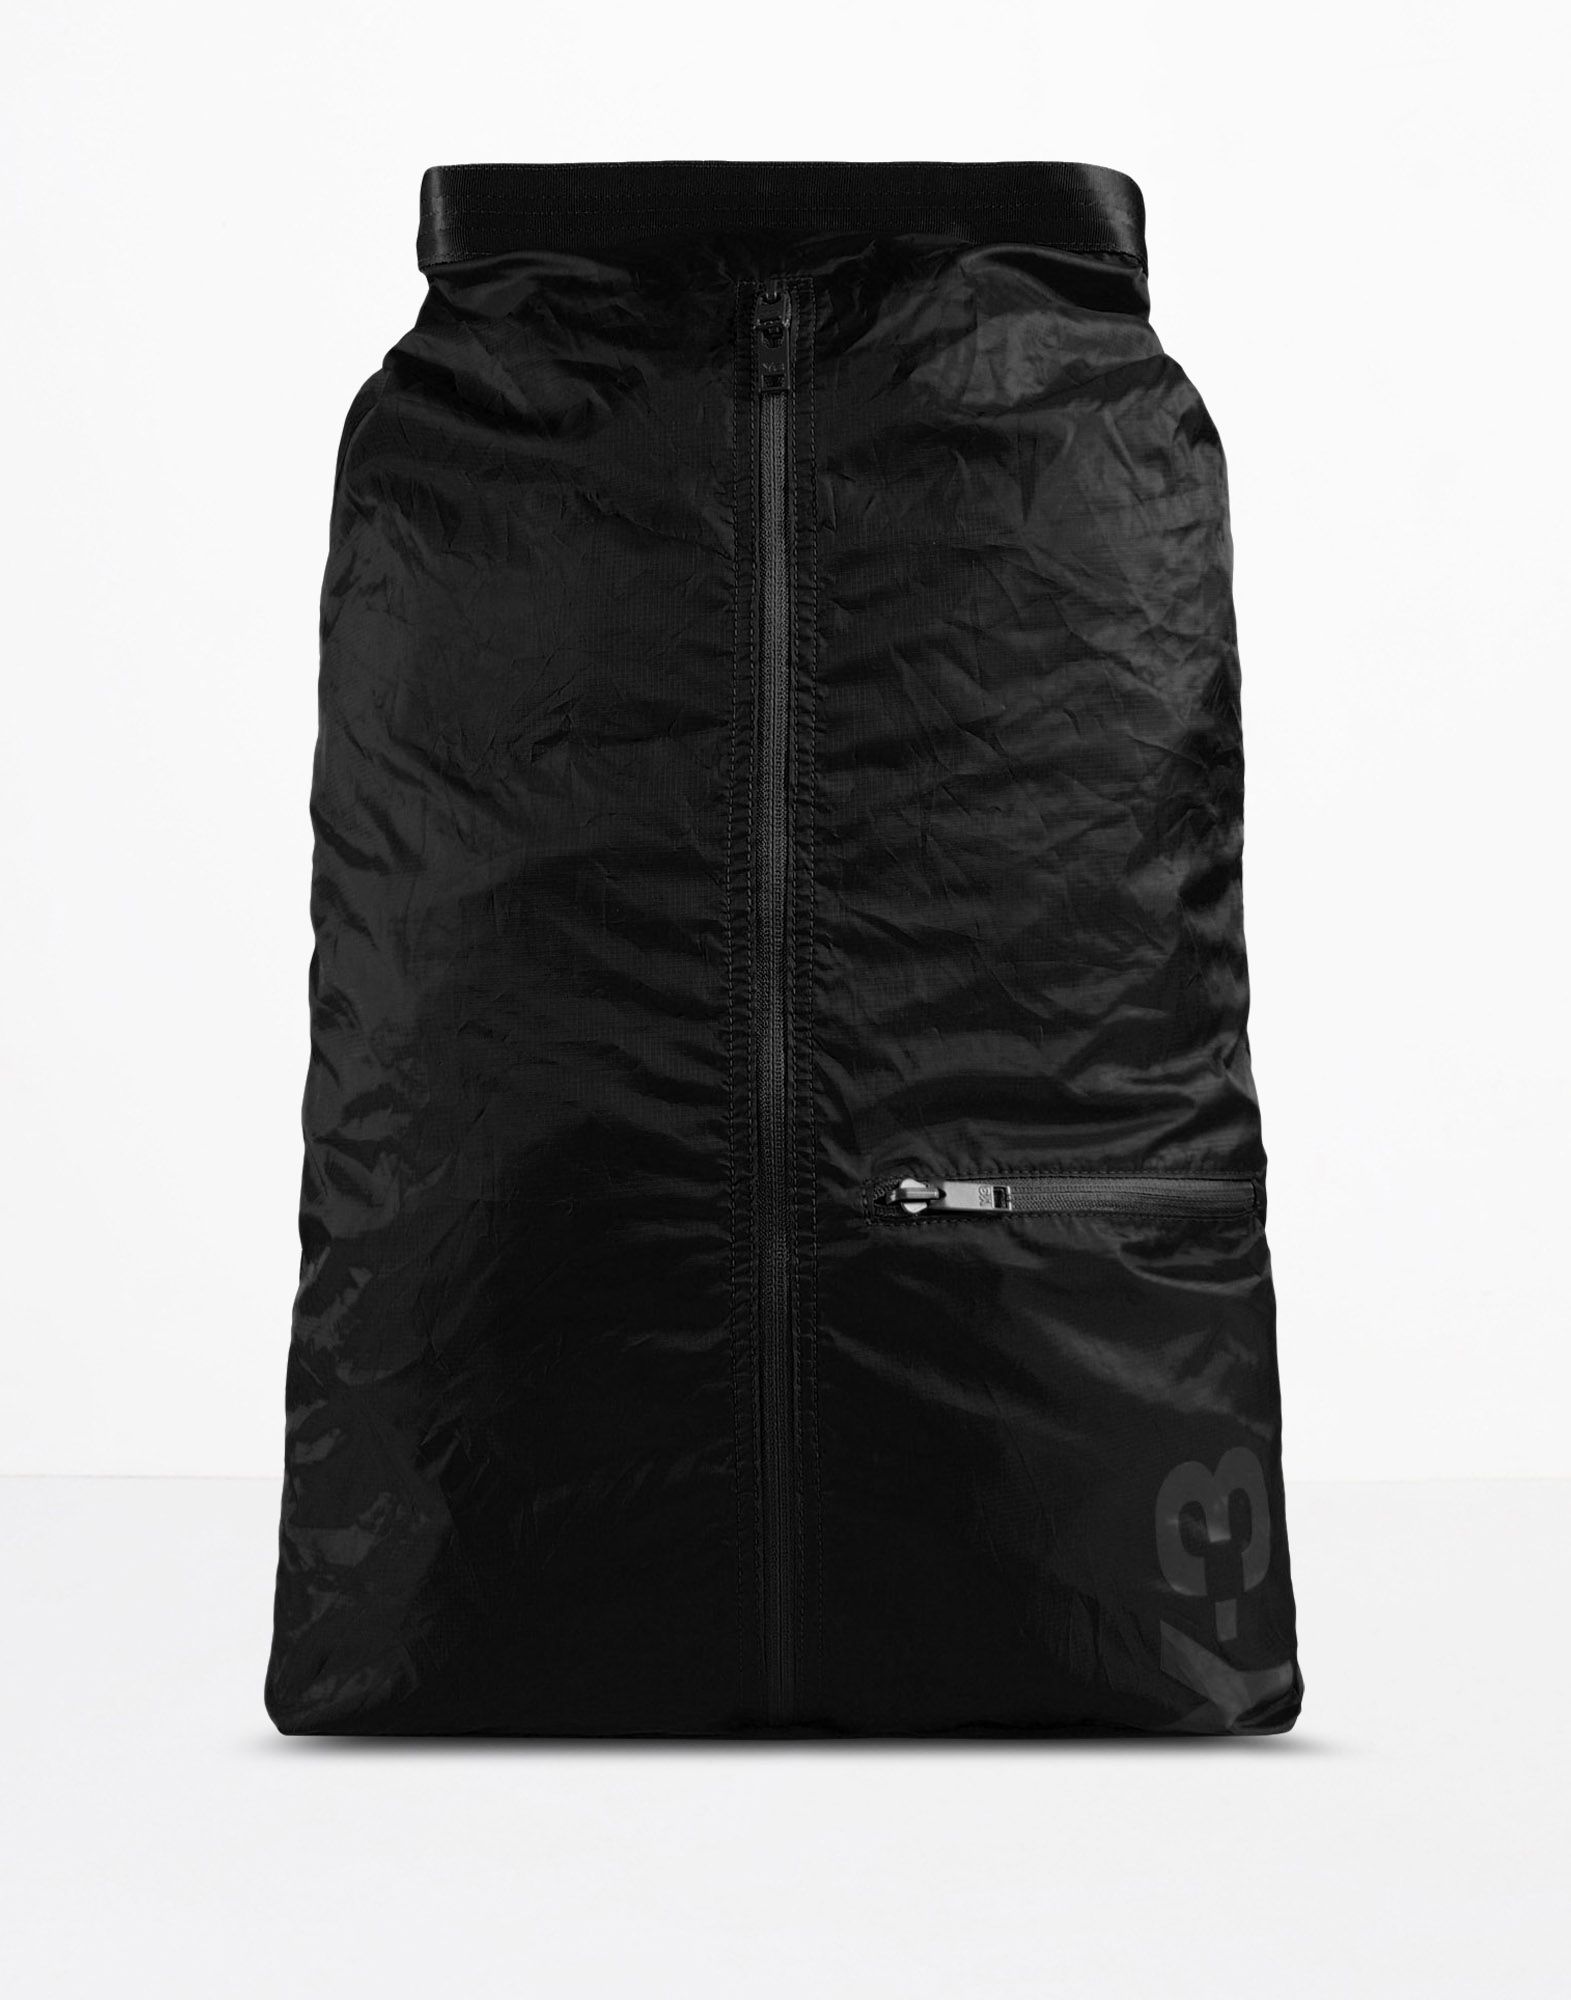 Y 3 PACKABLE BACKPACK for Women | Adidas Y-3 Official Store